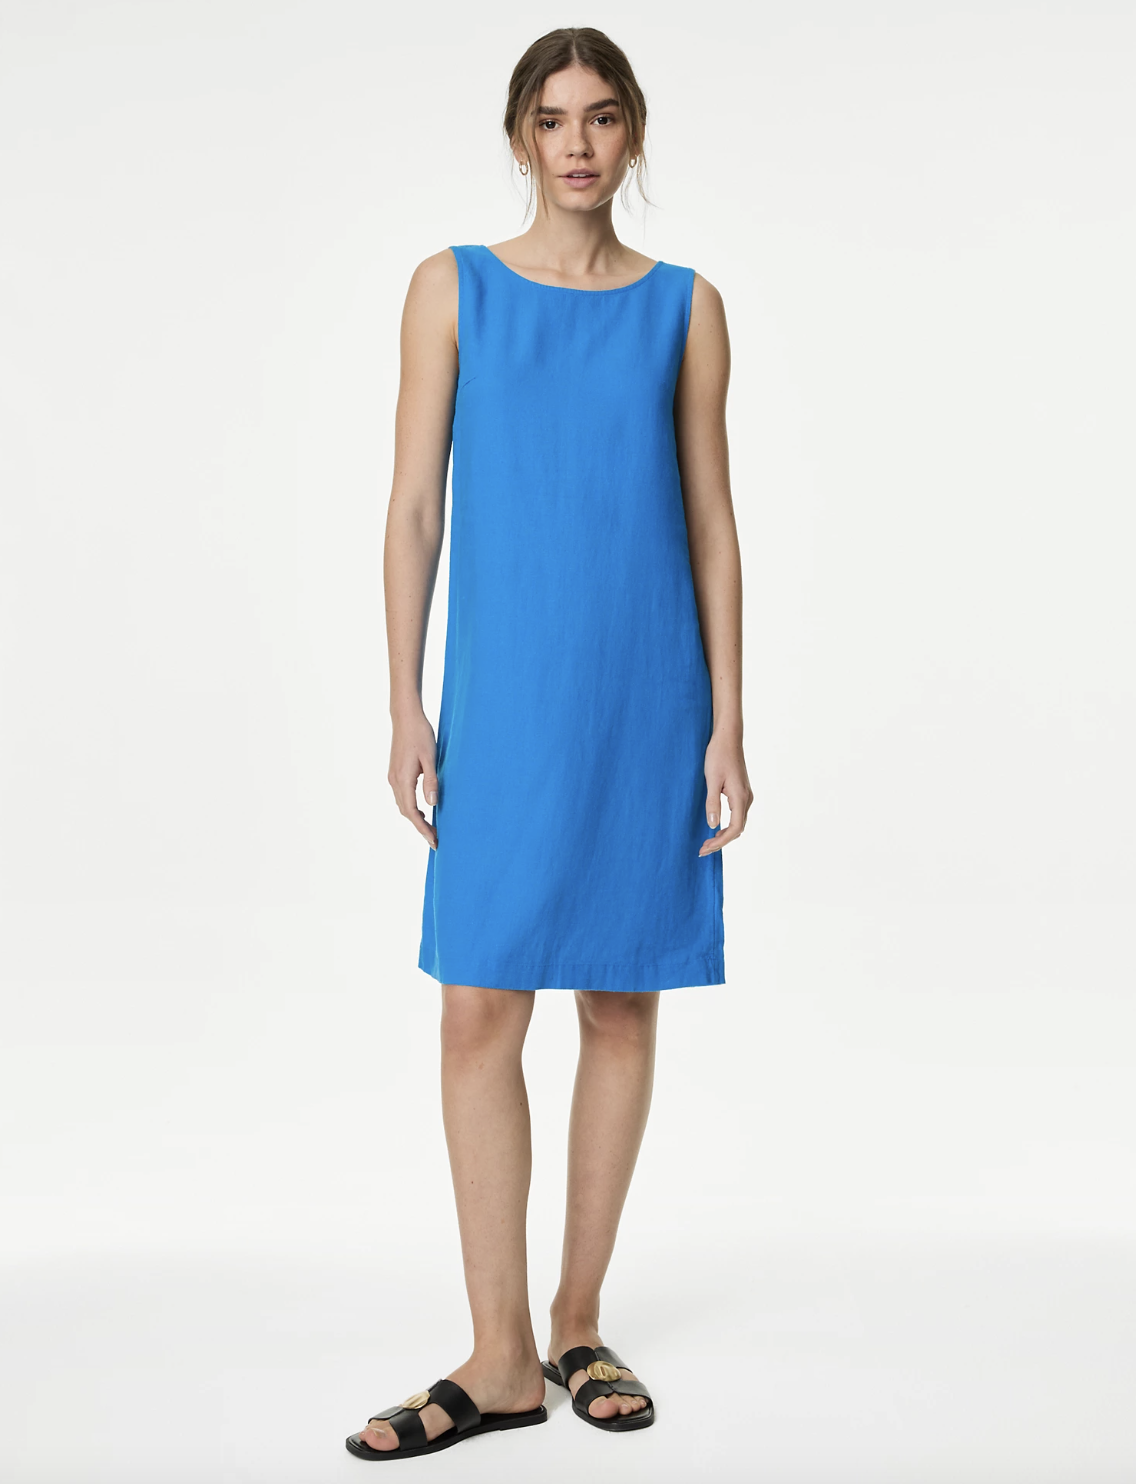 Colourful and comfortable, this linen dress is a versatile pick for your summer holiday wardrobe. (Marks & Spencer)